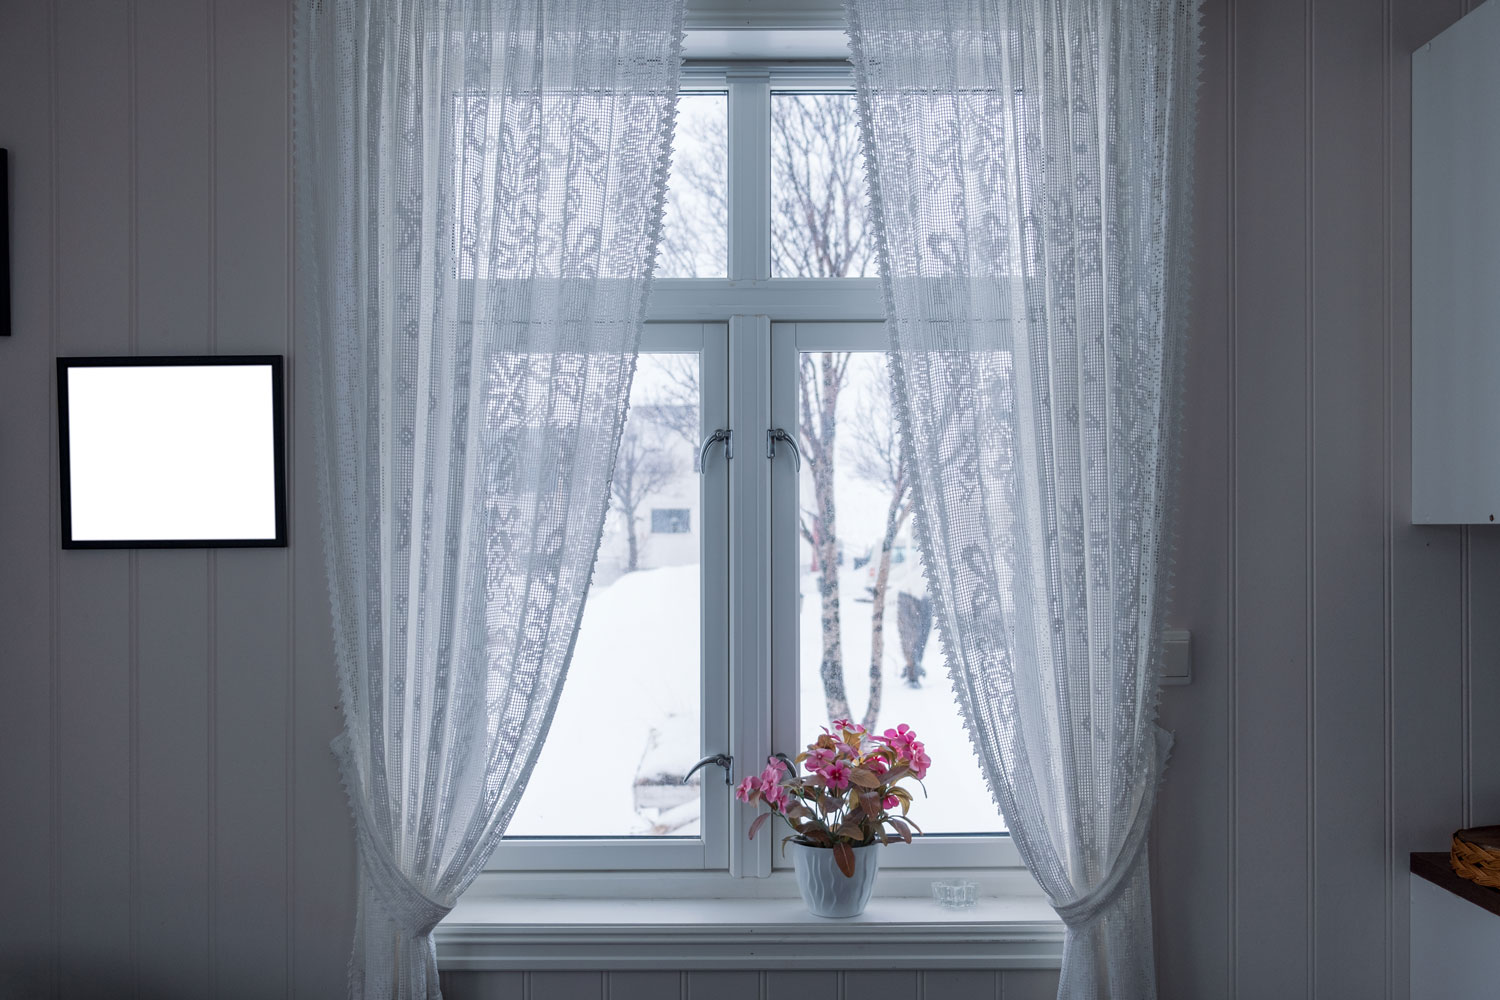 A white framed casement window with white curtains decorated with flowers, Do Casement Windows Open In Or Out? [And How Far Do They Open?]